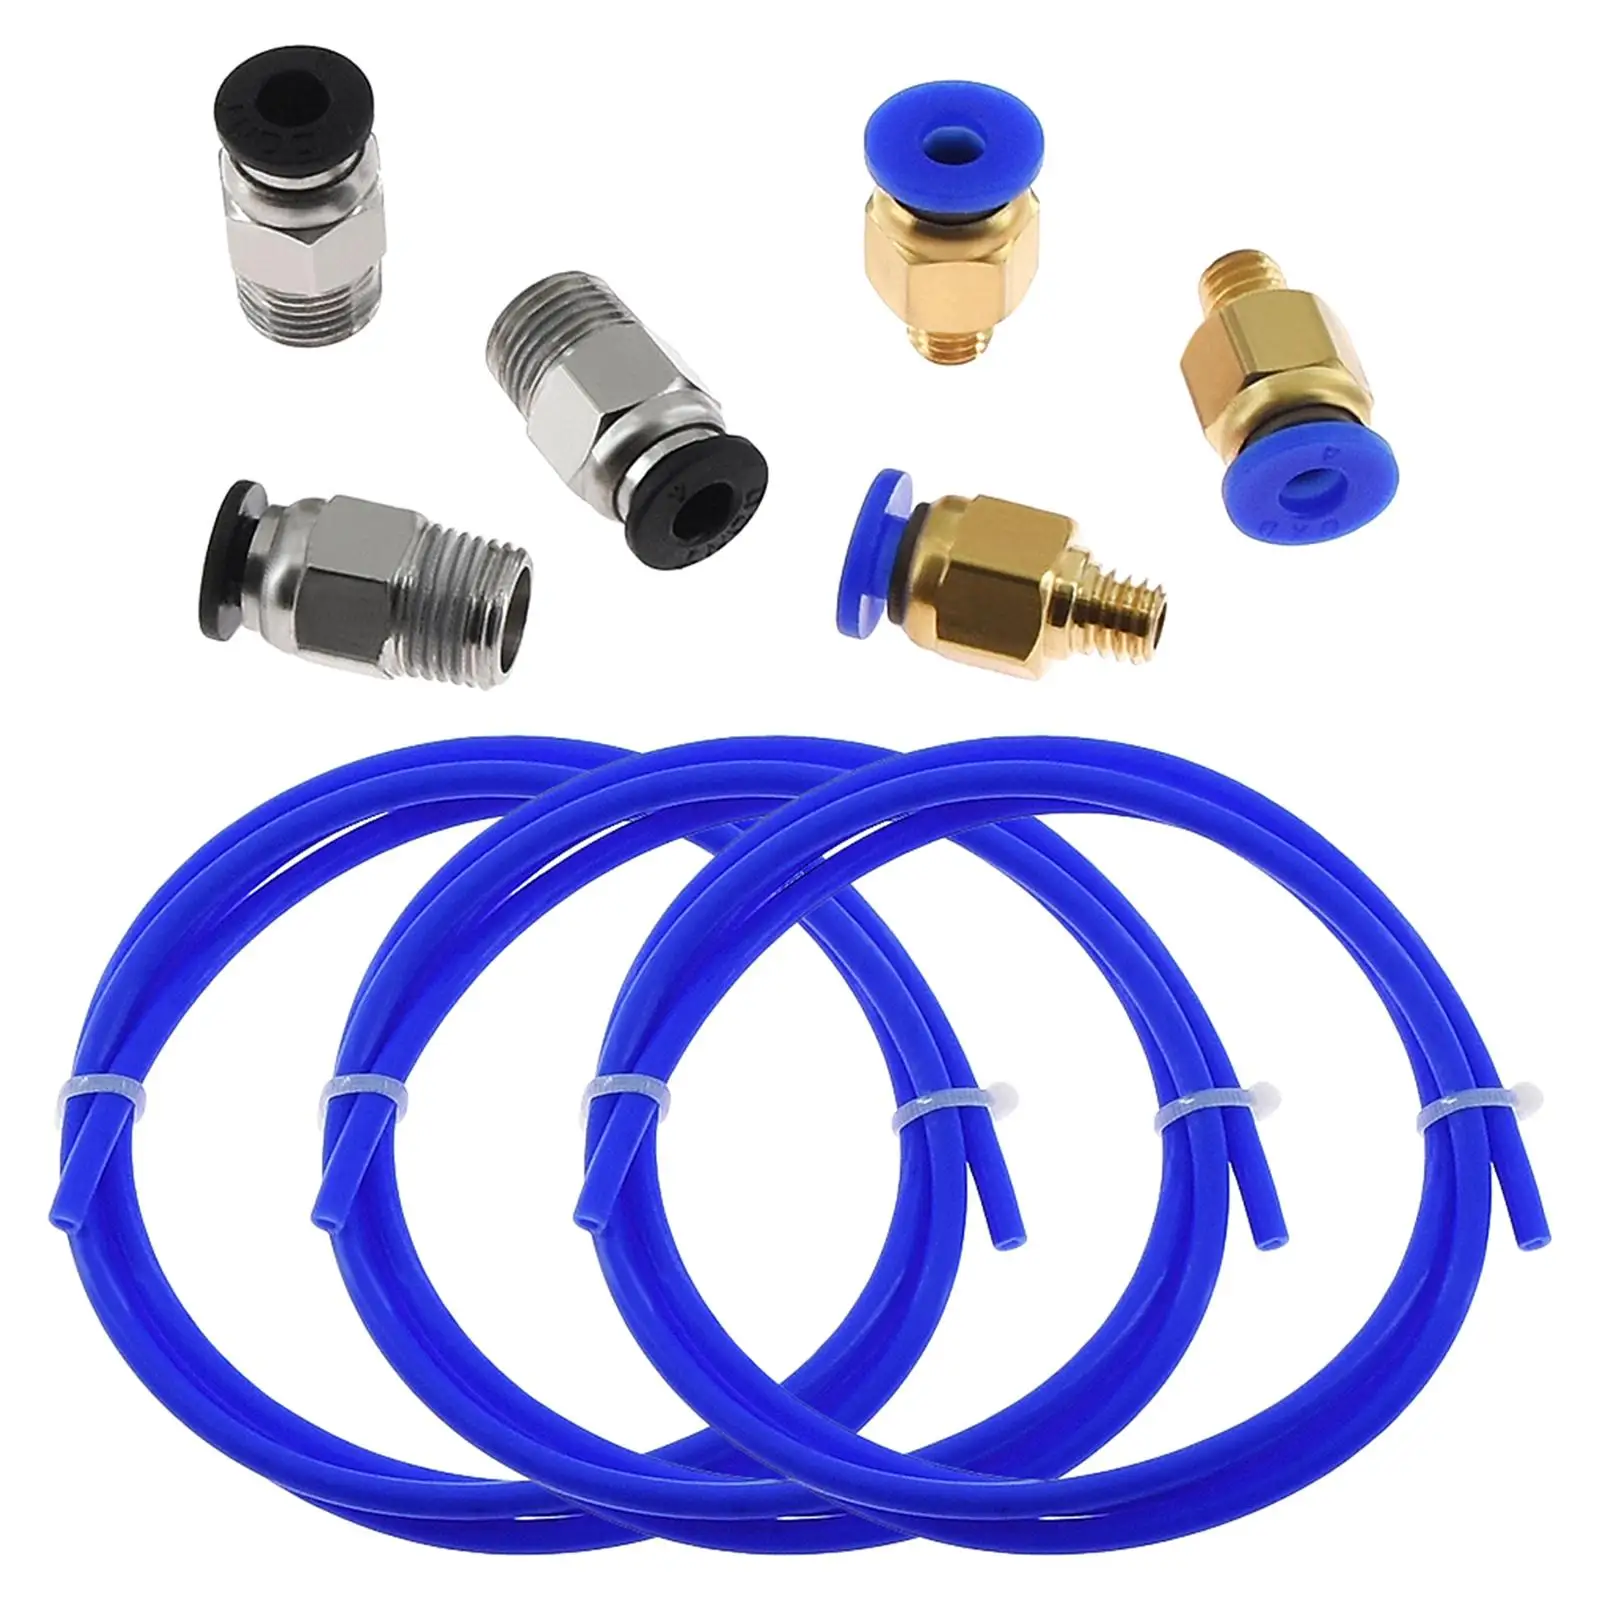 3Pcs  Tube PTFE Tubing 1M 6 Pneumatic Fitting 10 Fitting for  1.75 Spare Parts Replacement Premium